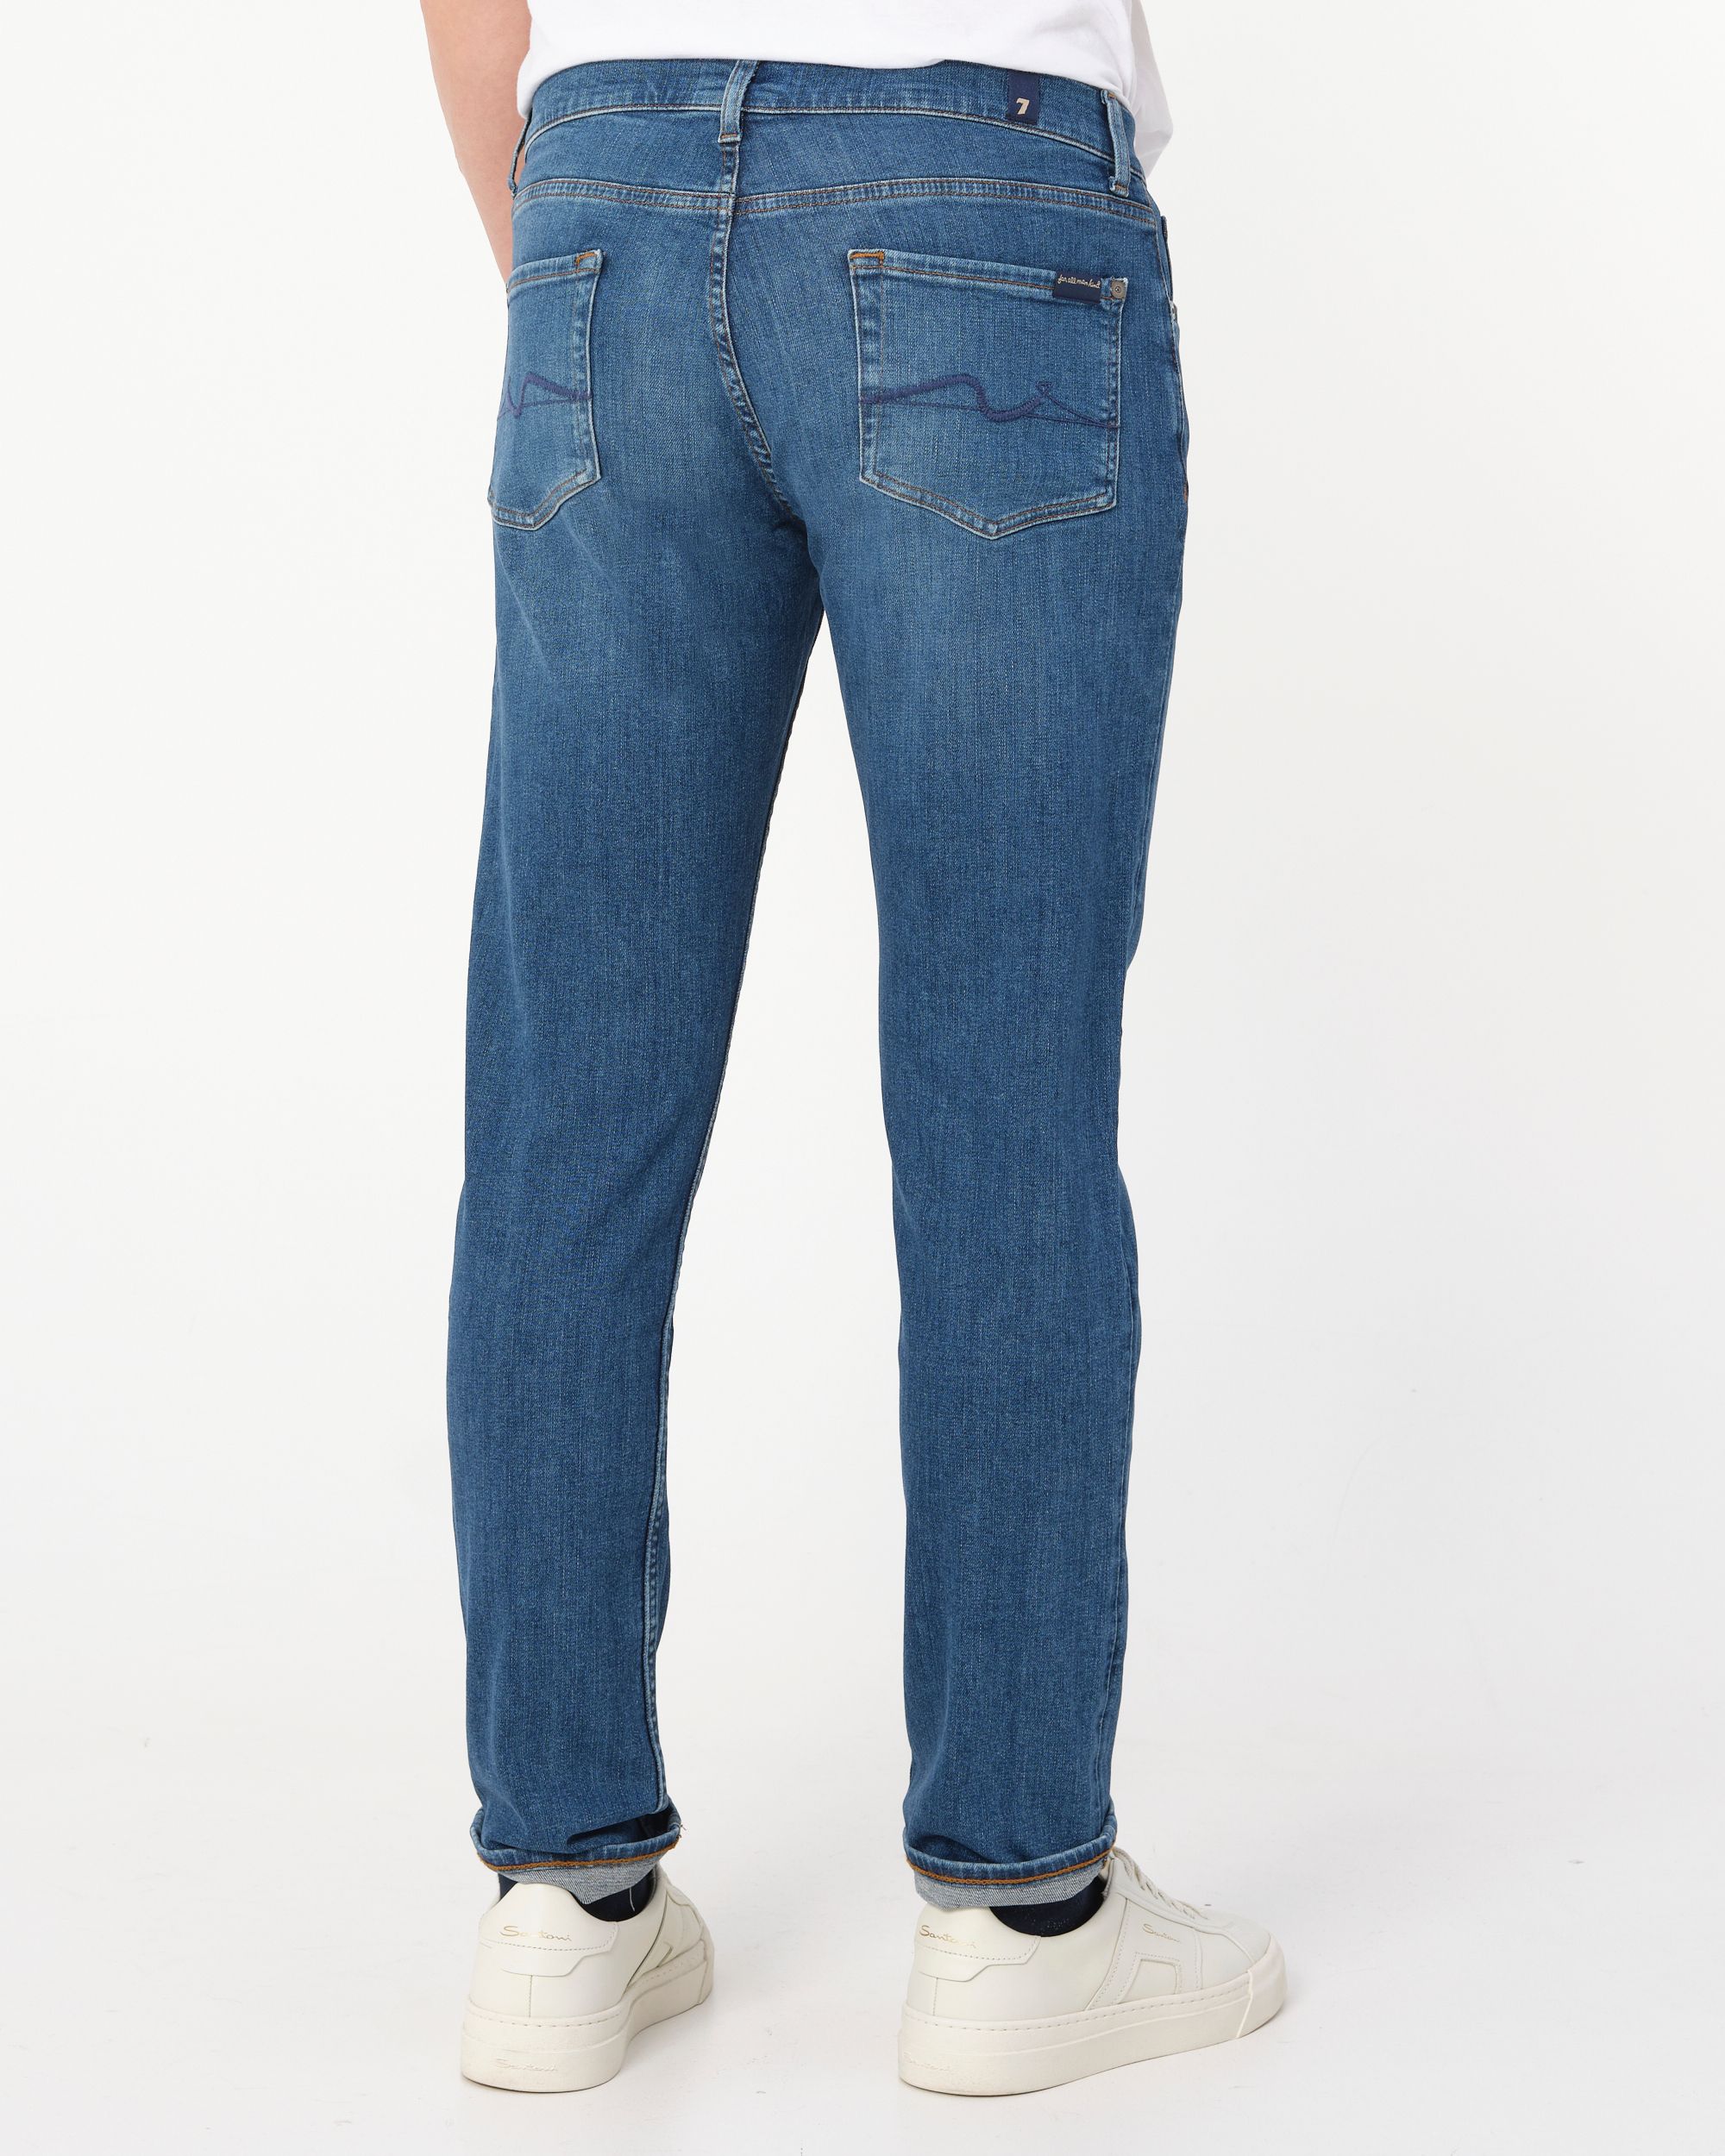 Seven for all mankind Jeans Blauw 091551-001-30